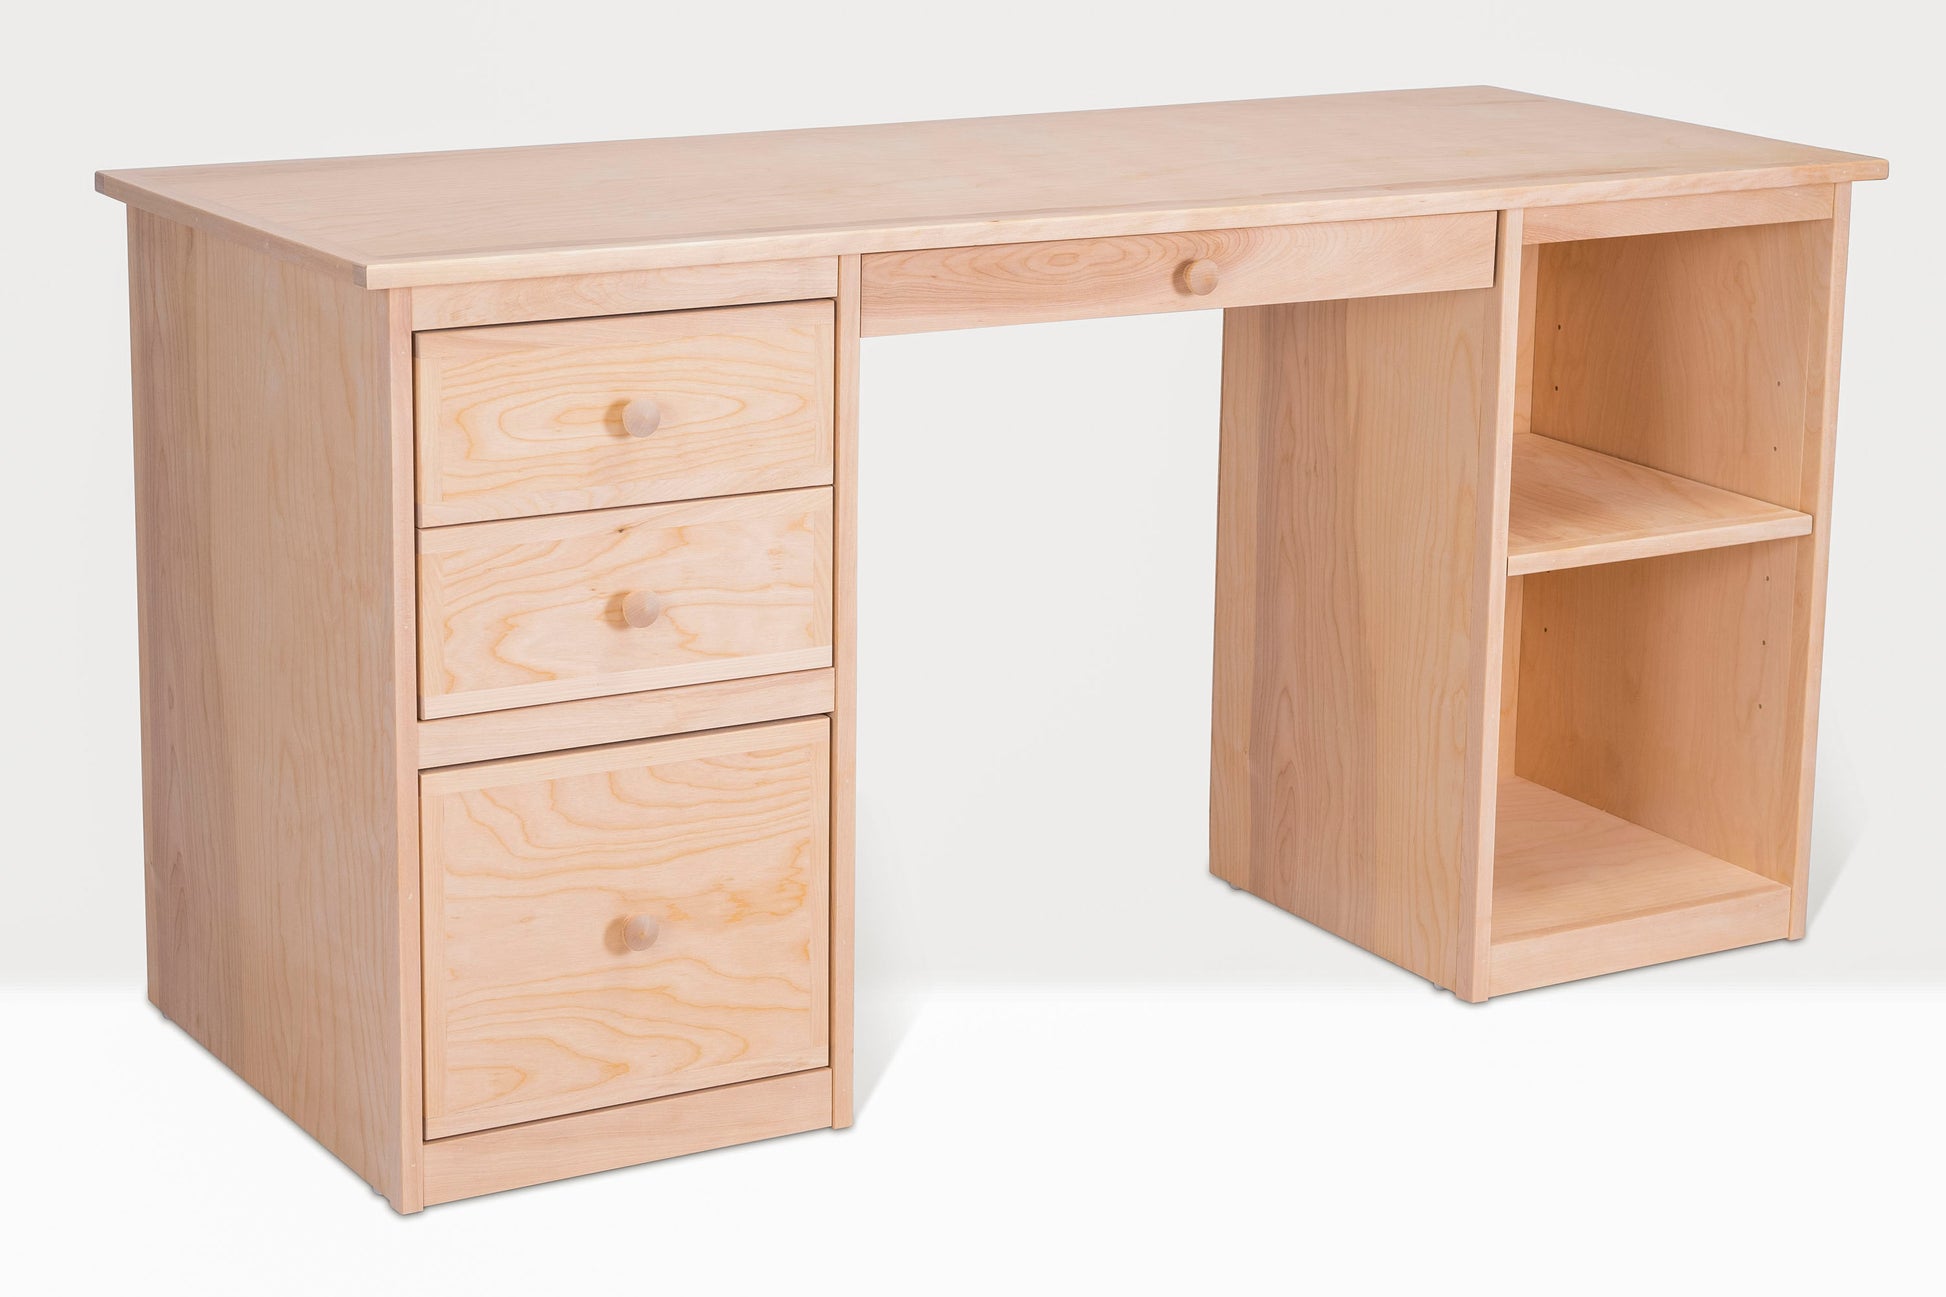 Berkshire Home Desk is made with birch hardwood and features four drawers and adjustable shelving. Shown unfinished.